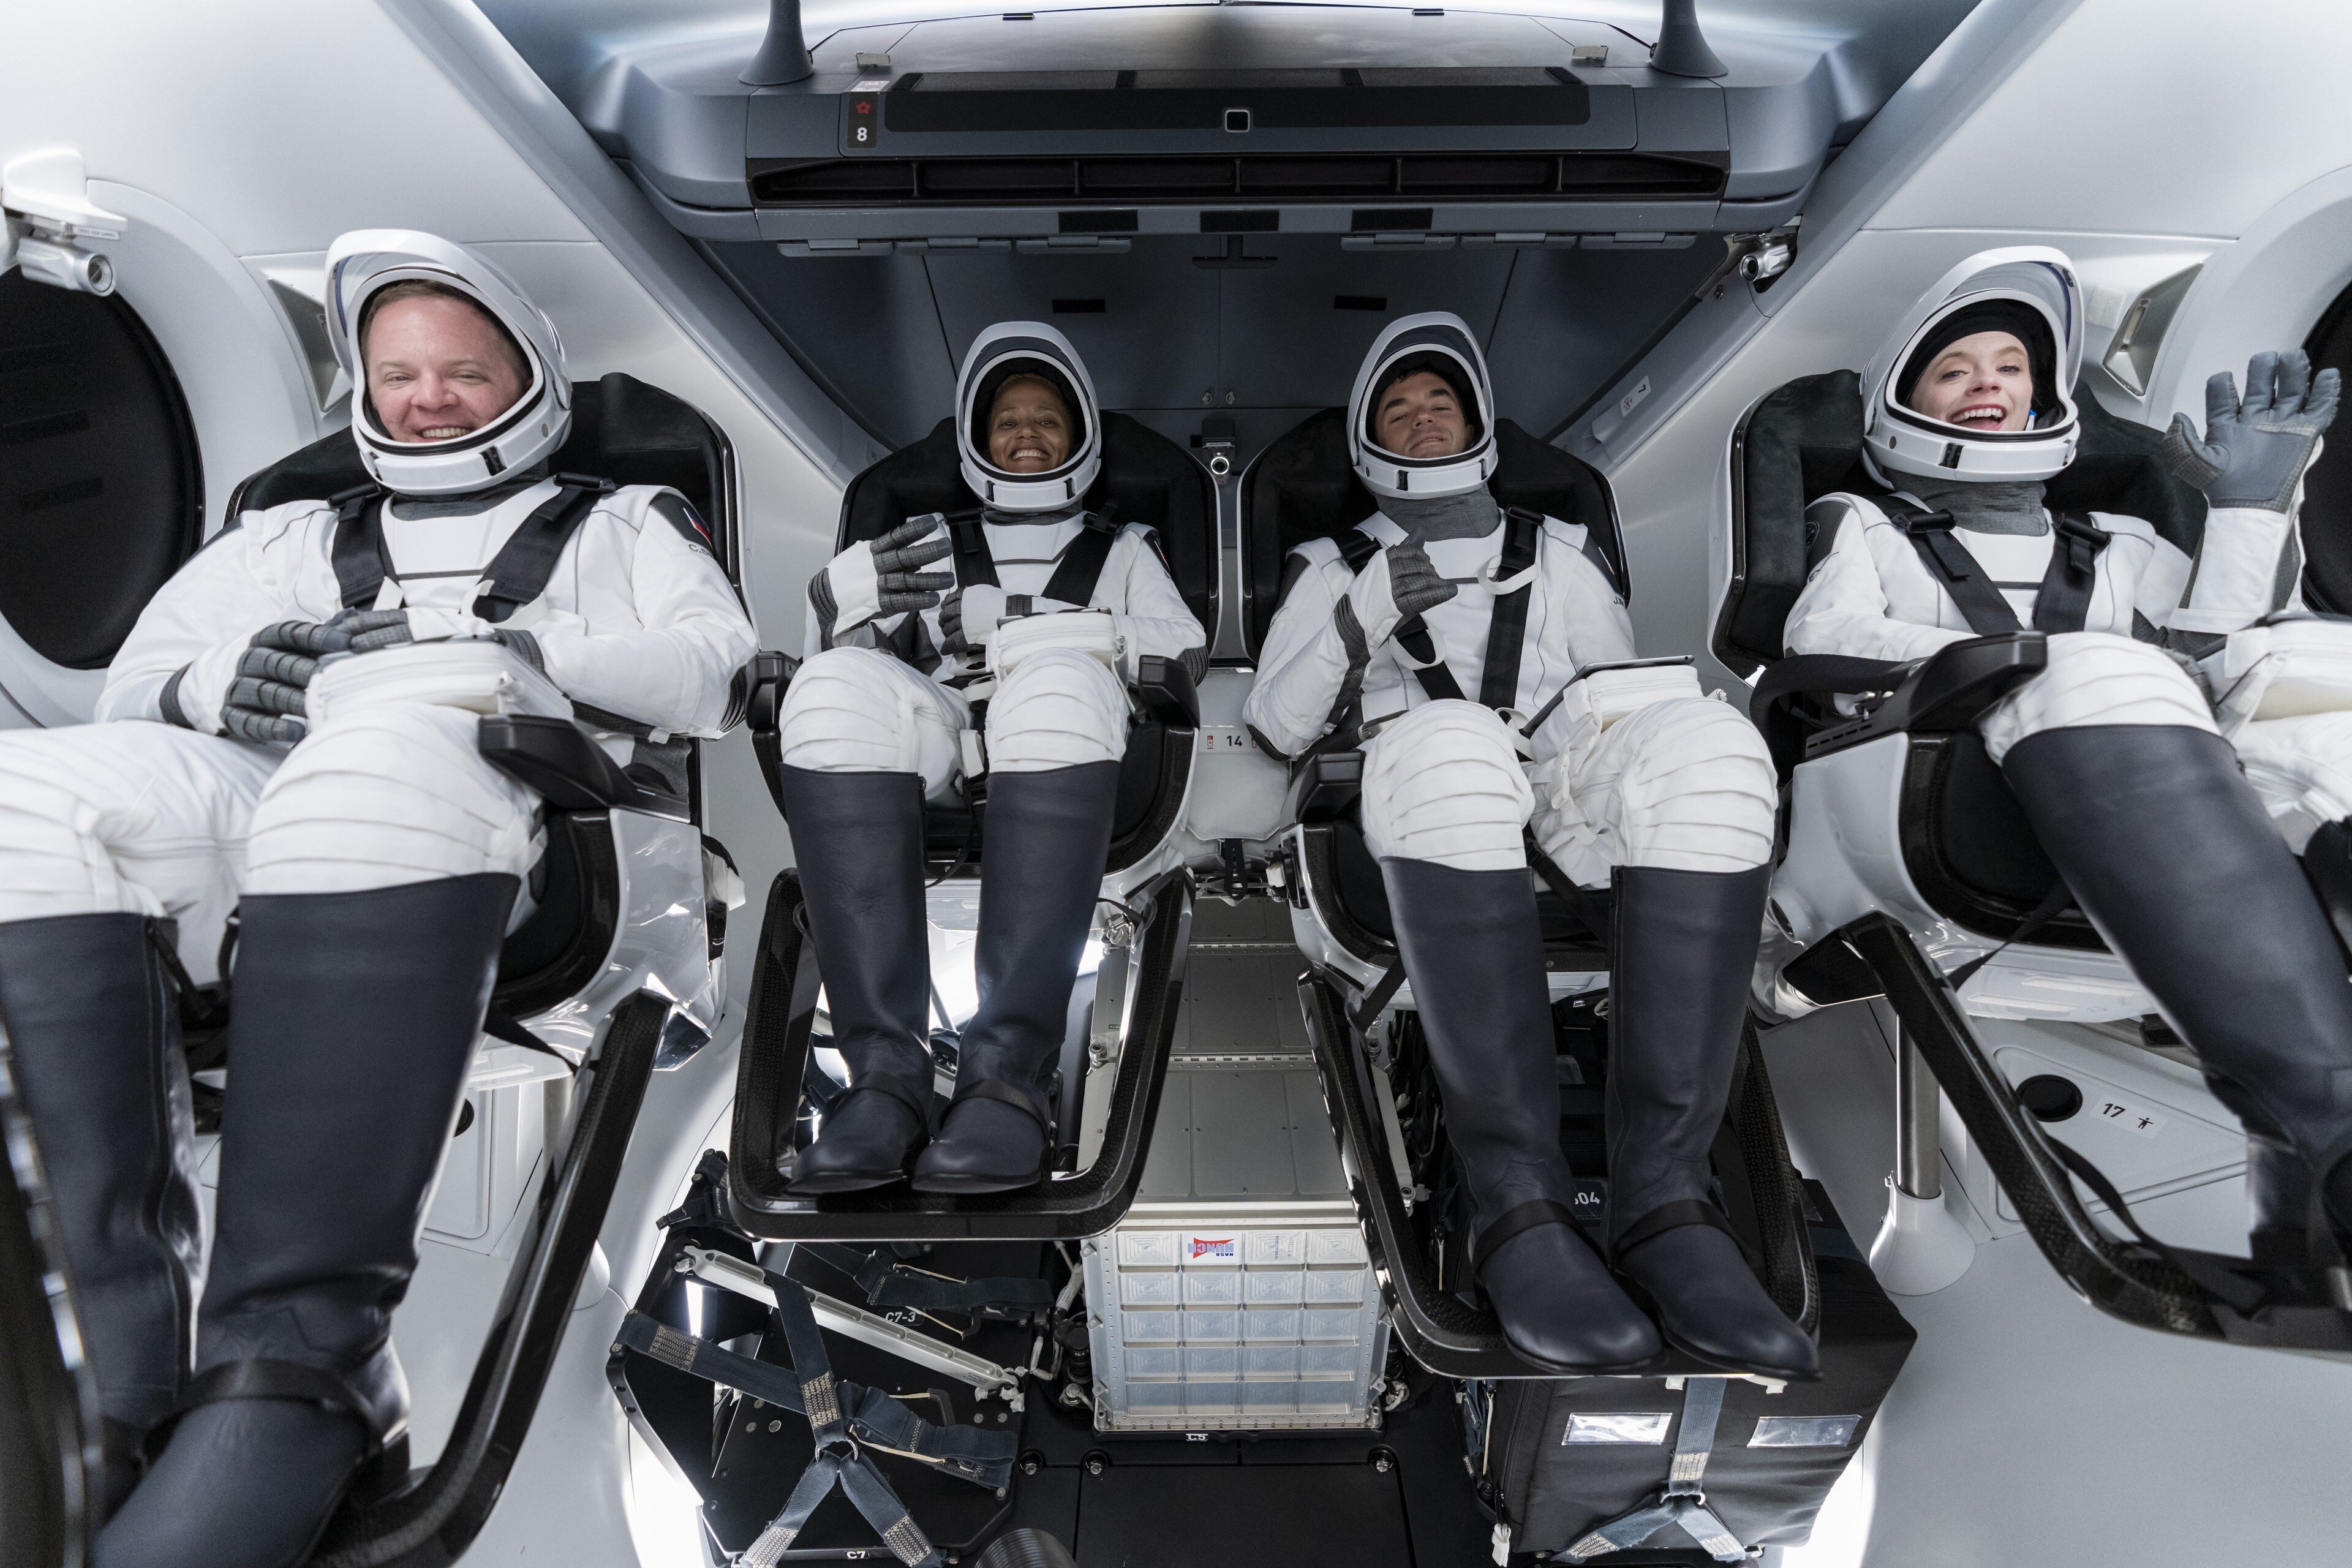 The four passengers are supposed to embody the opening-up of space to everyone, giving the mission its name: Inspiration4. Photo: SpaceX